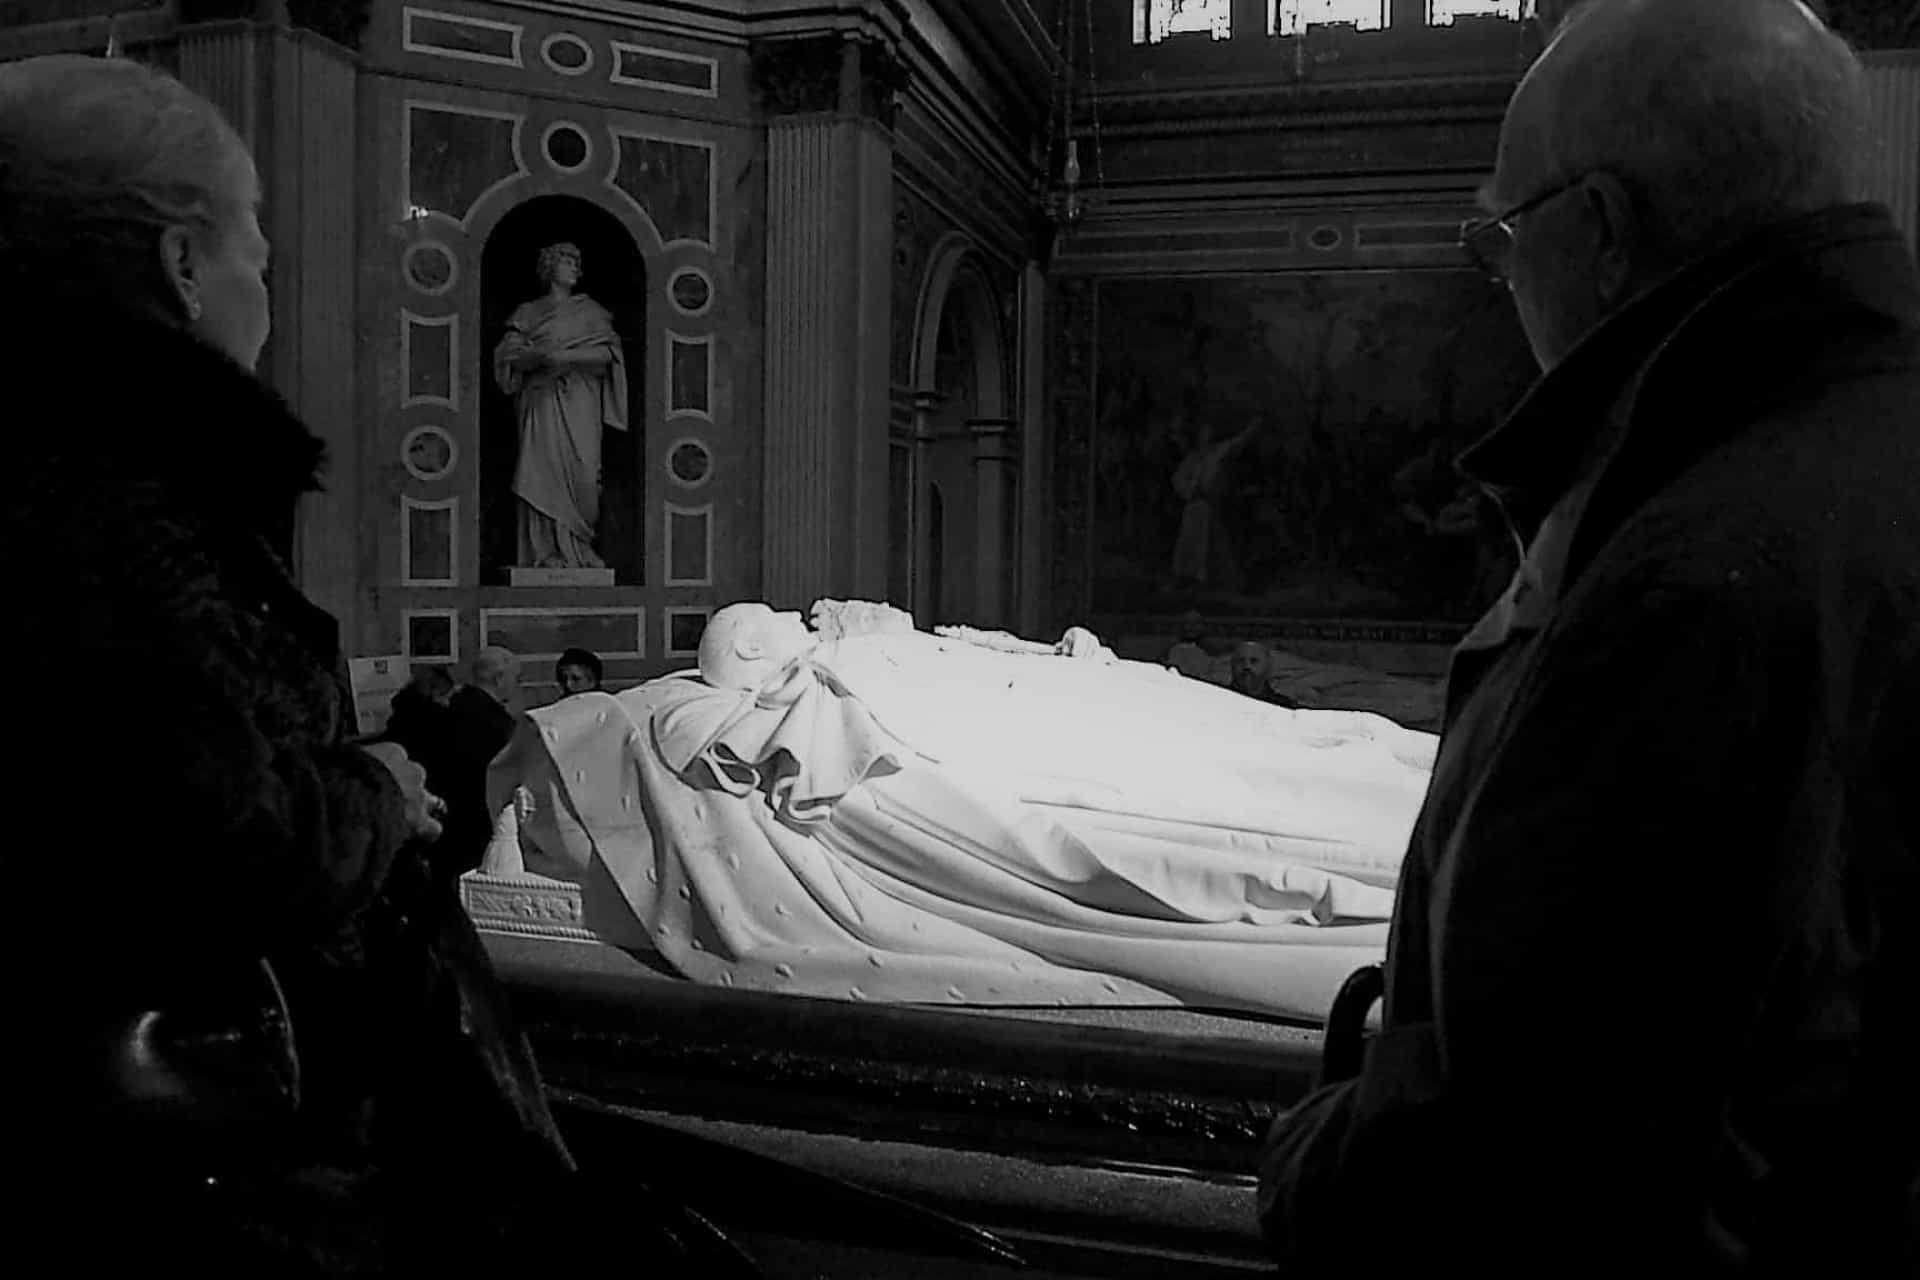 <p>Instead, she wanted her coffin taken straight from her place of death to St George’s Chapel where her funeral took place. She only allowed for two days of private viewings so her family could pay their respects, but obviously she had quite a bit of loot in her coffin that she didn’t want them to see… Today, she lies in the Royal Mausoleum at the Frogmore Estate in Windsor, side by side with her beloved Prince Albert.</p><p>Sources: (<a href="https://historycollection.com/heres-the-list-of-queen-victorias-burial-request-in-her-final-moment/" rel="noopener">History Collection</a>) (<a href="https://www.ripleys.com/weird-news/burial-queen-victoria/" rel="noopener">Ripley's</a>) (<a href="https://www.theguardian.com/uk/2004/dec/16/monarchy.stephenbates" rel="noopener">The Guardian</a>)</p><p>See also: <a href="https://www.starsinsider.com/lifestyle/450359/the-royal-weddings-that-changed-european-history">The royal weddings that changed European history</a></p>